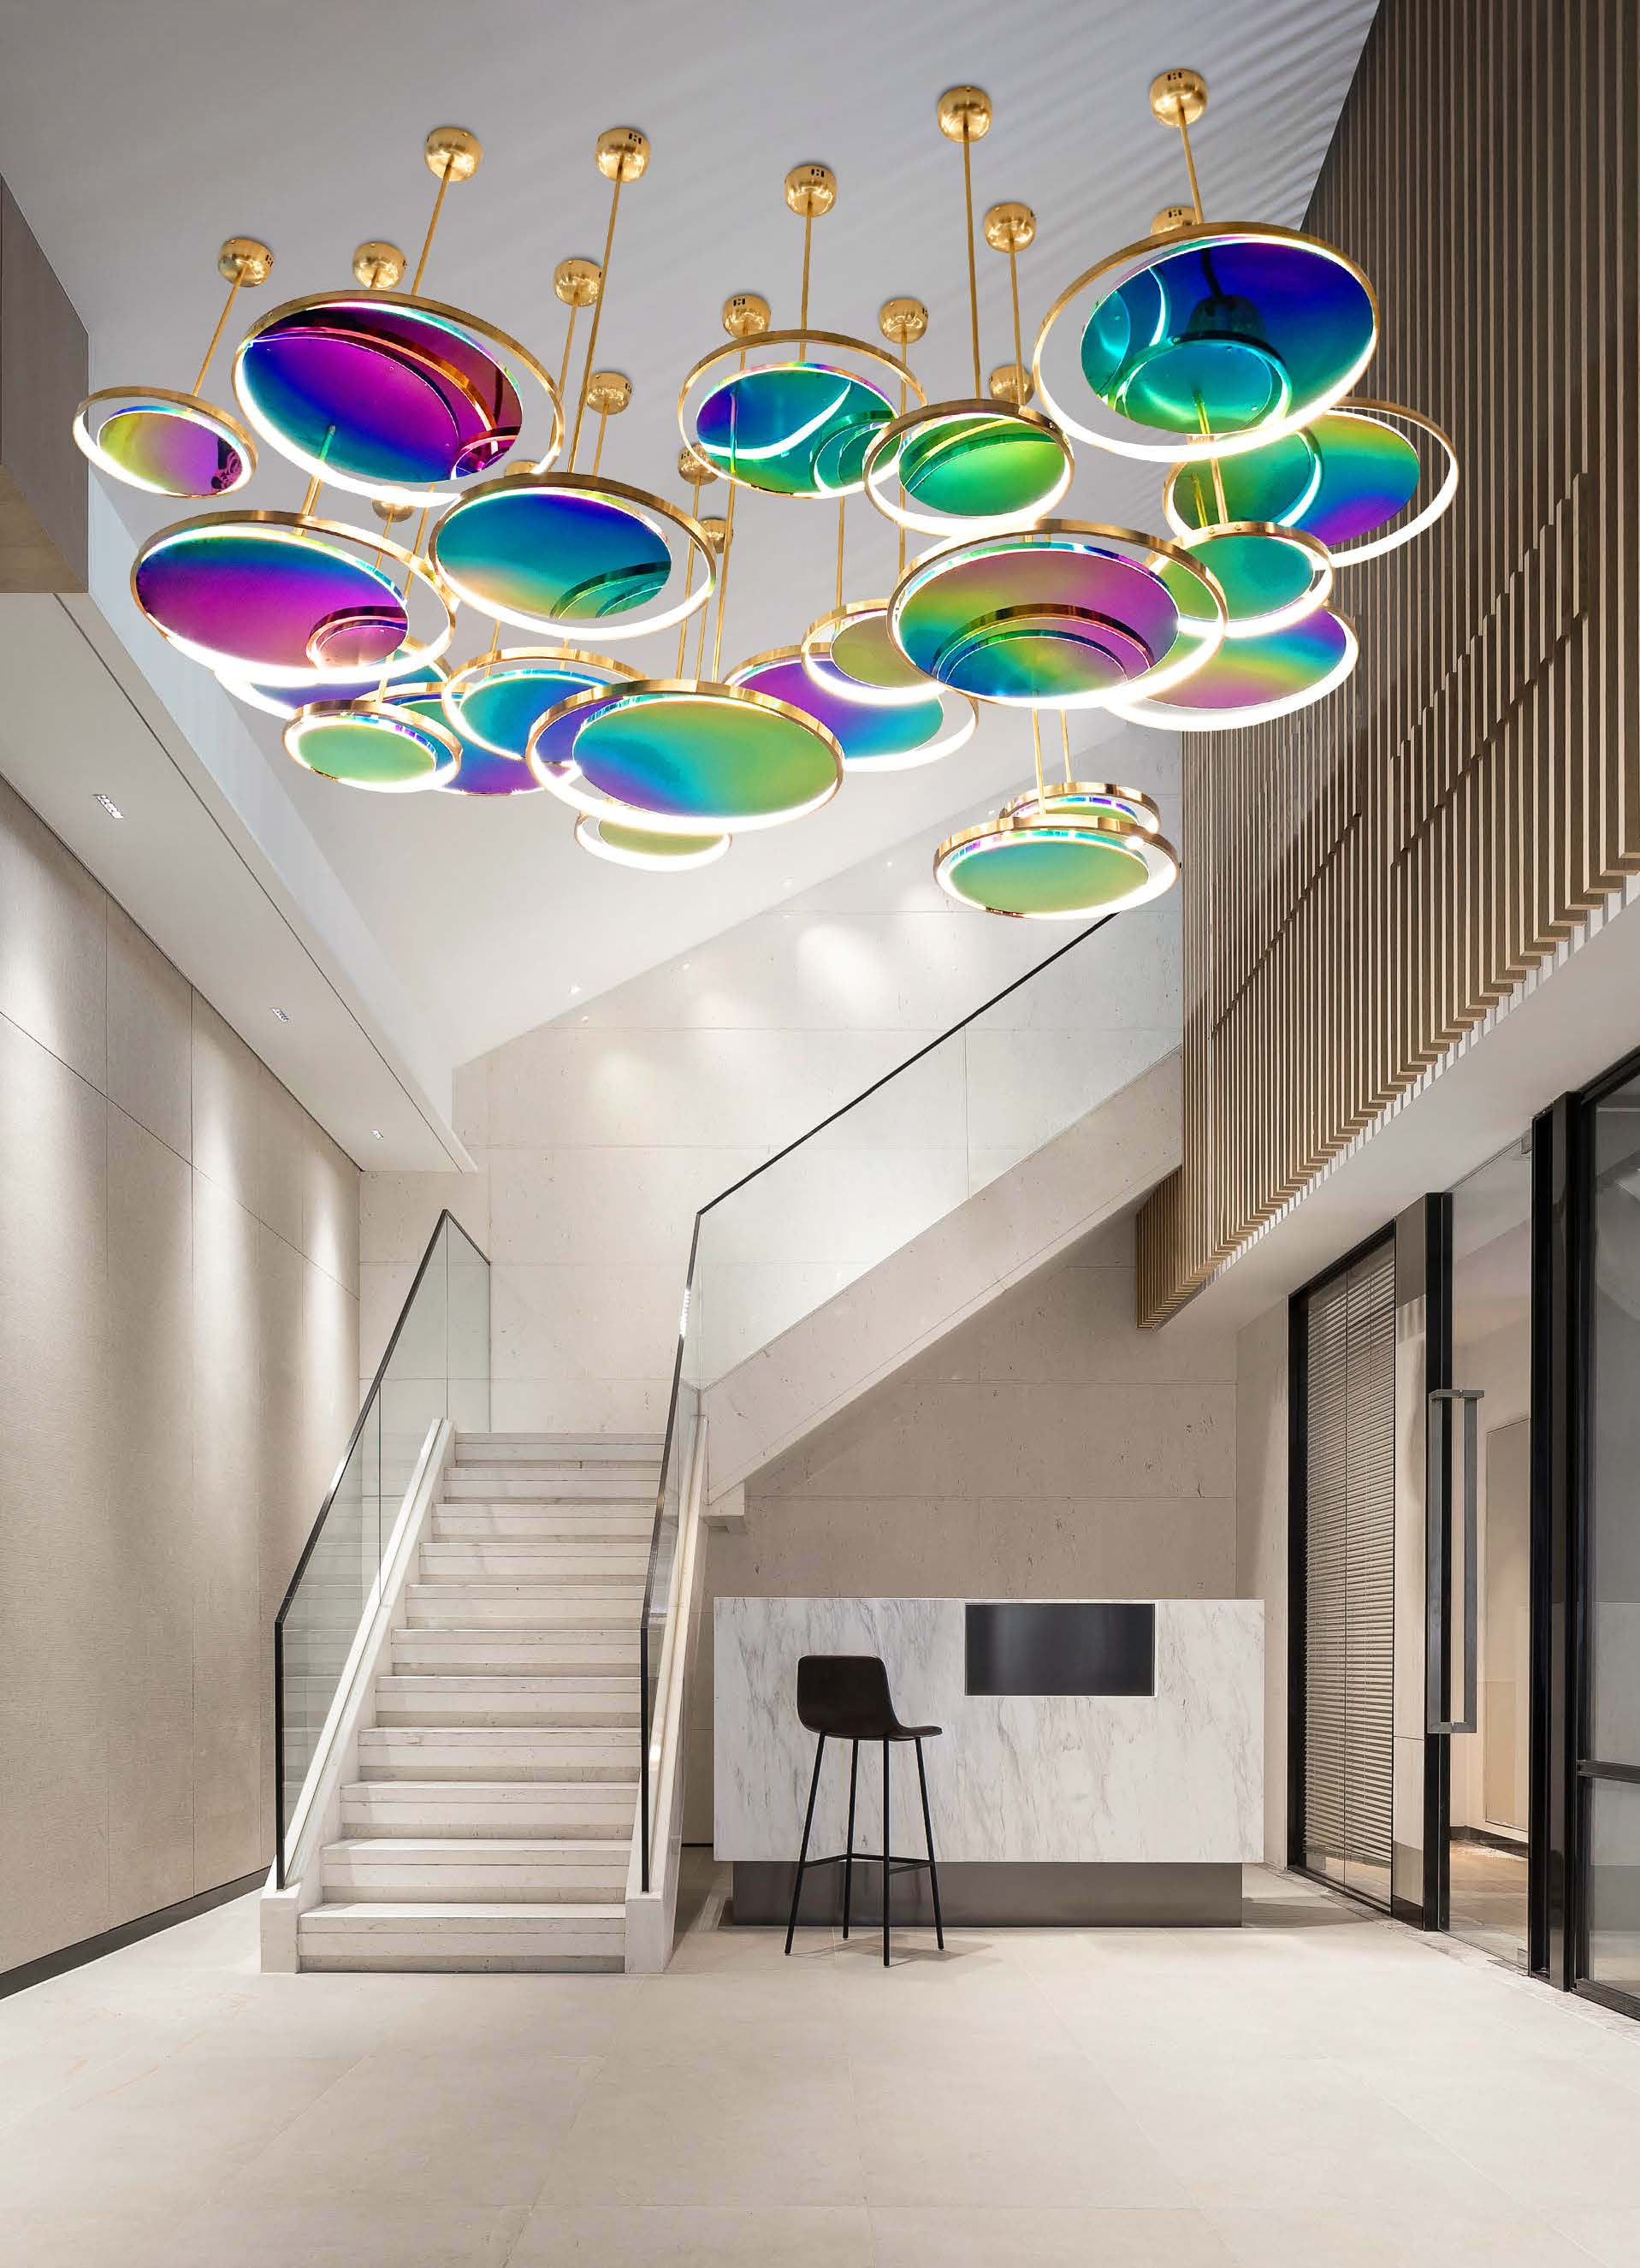 Interior Round Colorful Stainless Steel Store Salon LED Pendant Lamp (KD91256-D60)